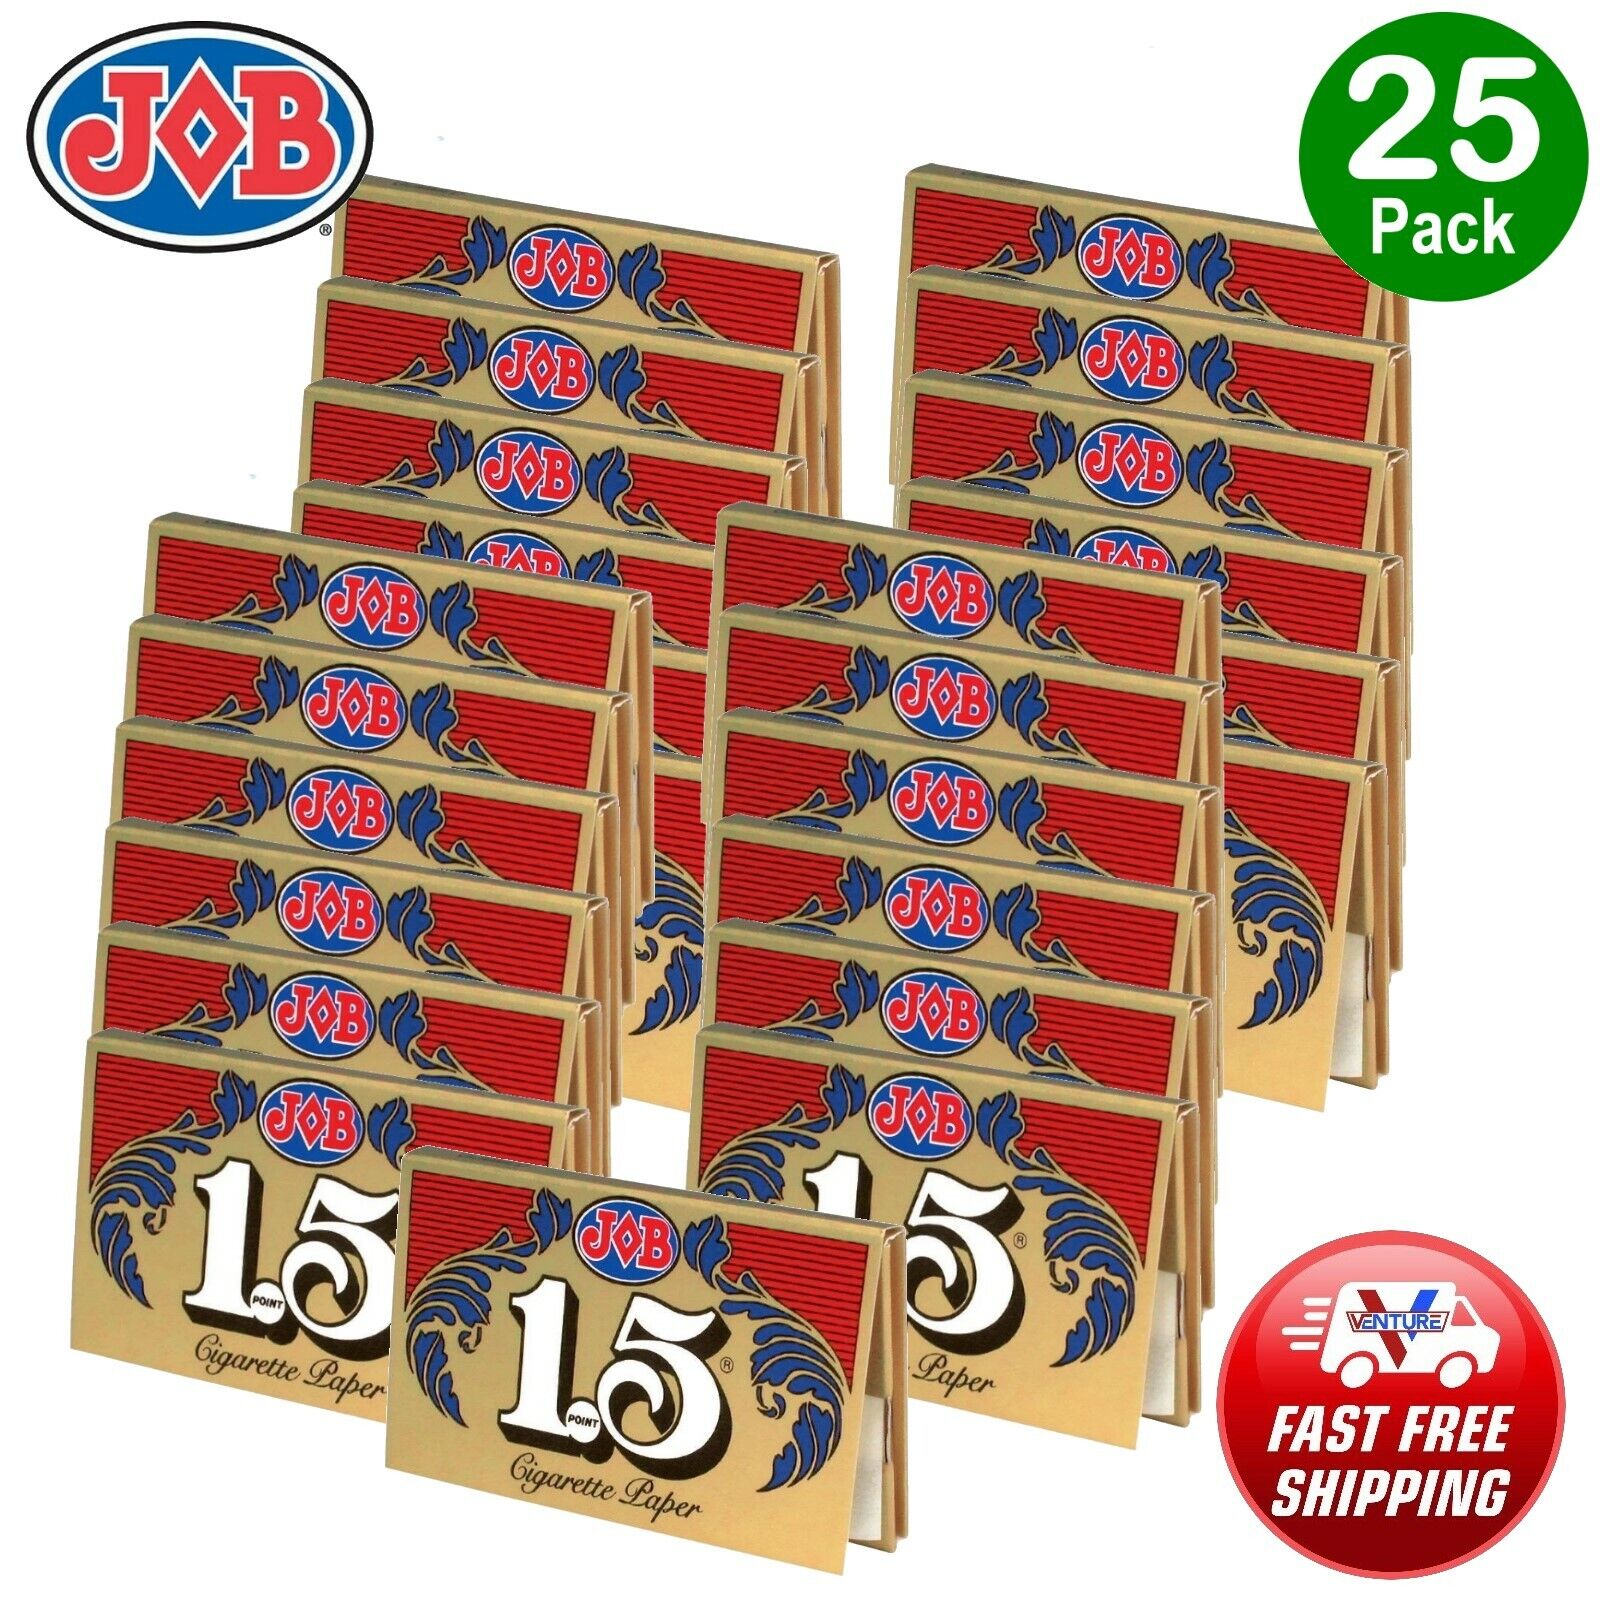 25X JOB Gold 1 1/2 1.5 Rolling Papers 25 Booklet (24 Paper Each)